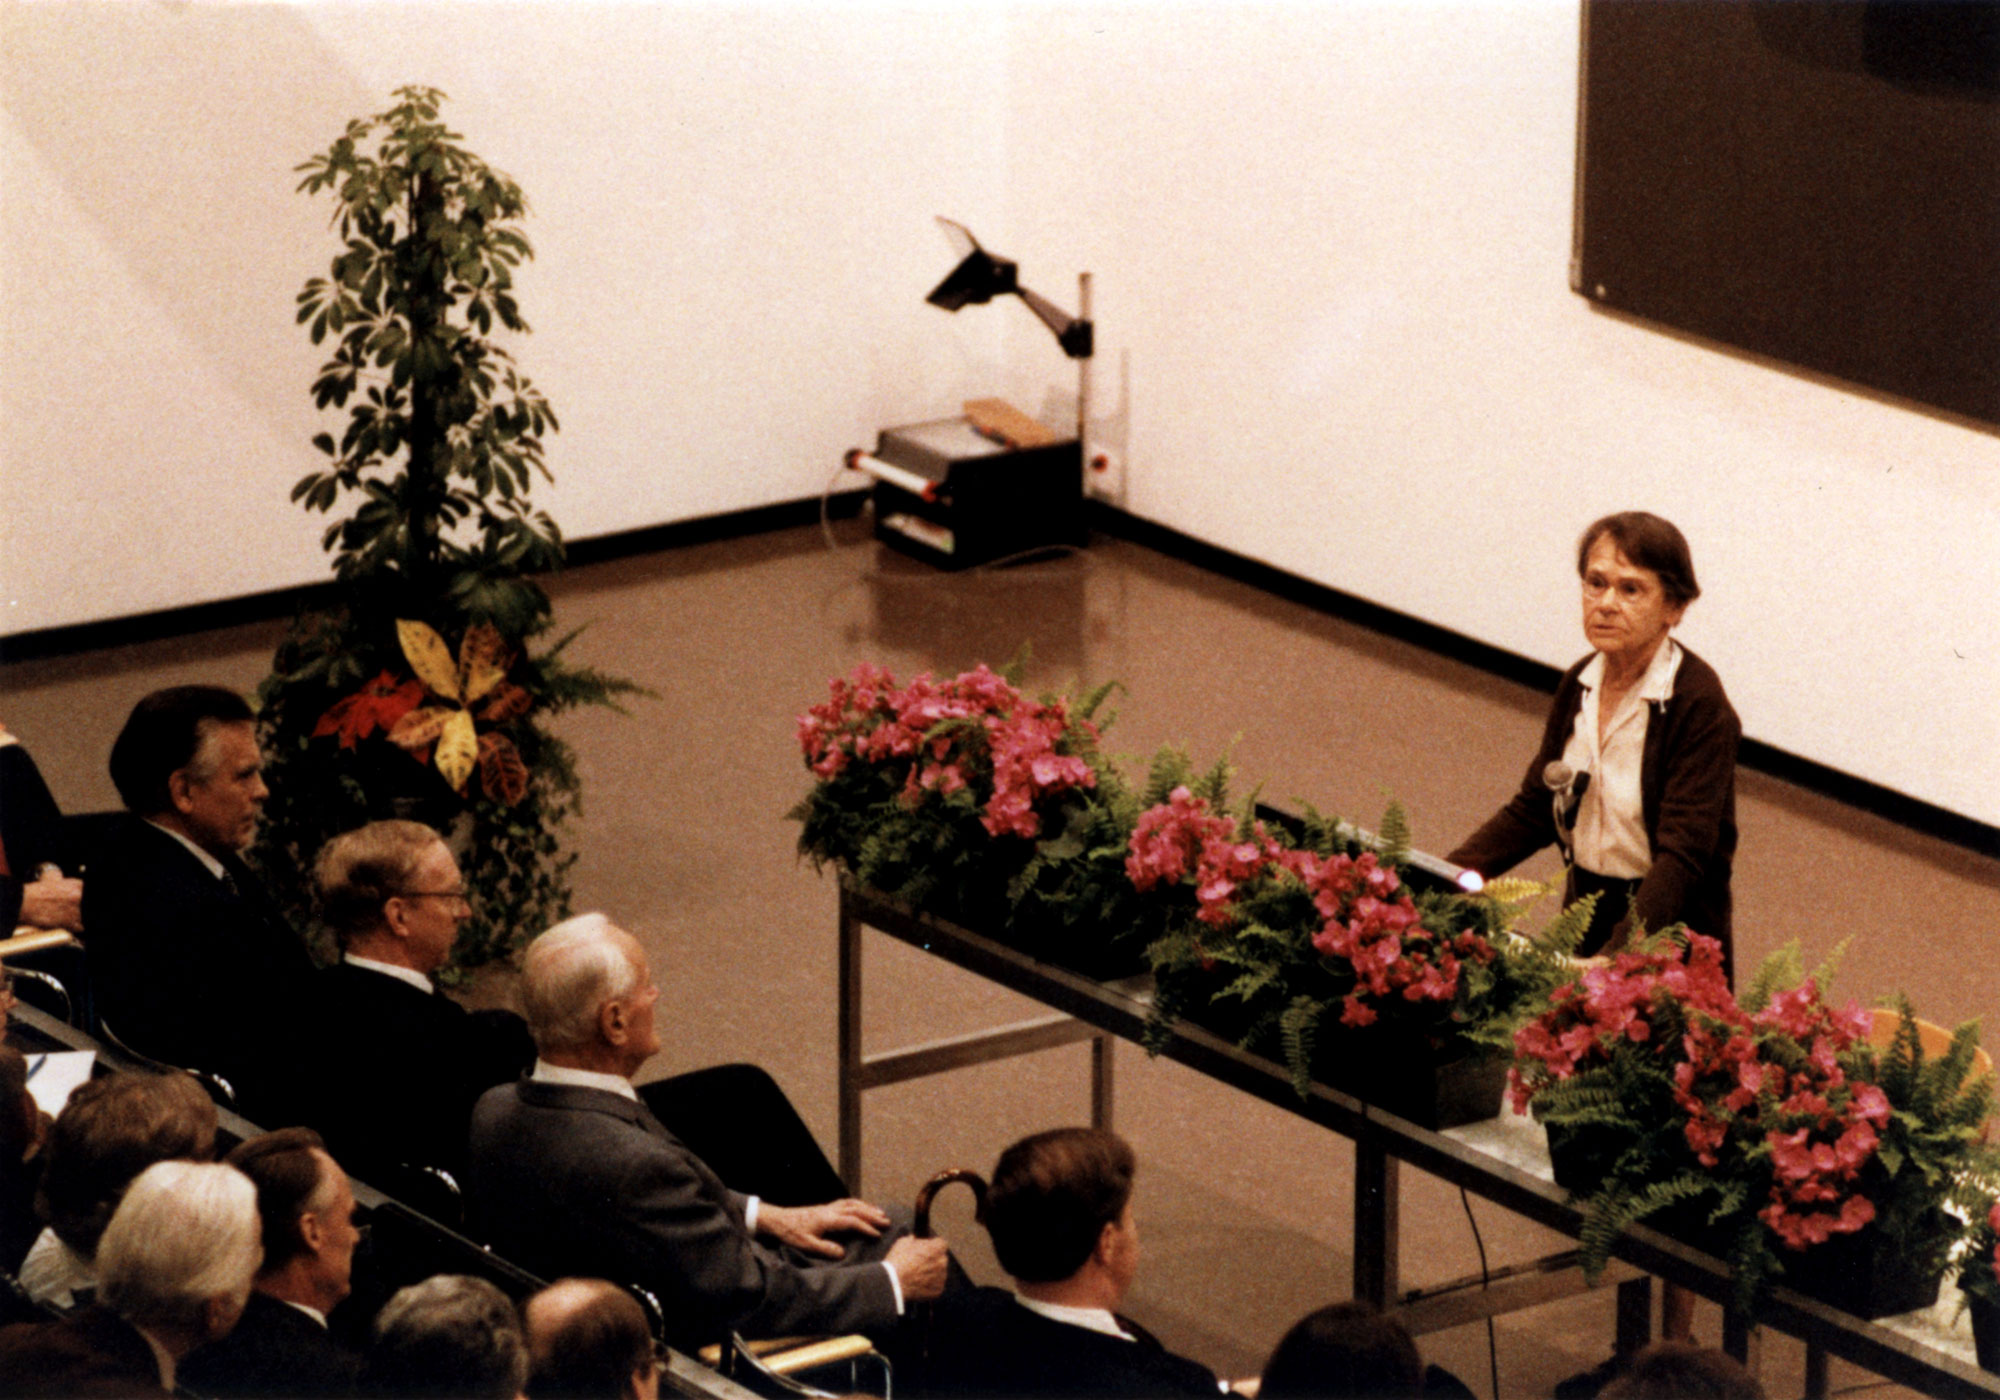 Photograph of Barbara McClintock giving her Nobel lecture. The photo shows a woman standing at a long table with flowers at the front of a lecture hall. Men in suits sit facing her.